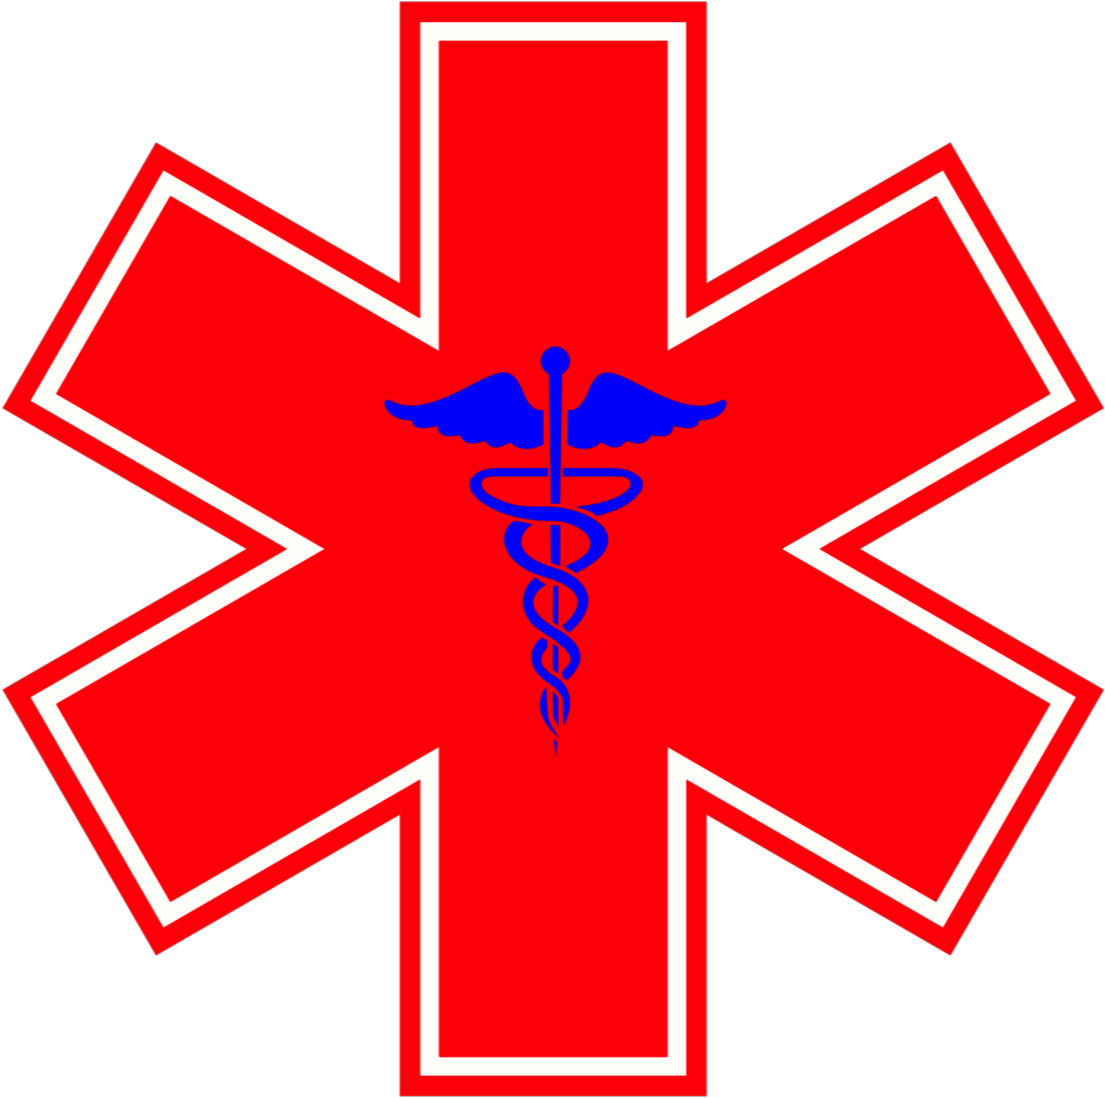 Medical - Red Star Of Life (1126x1125)